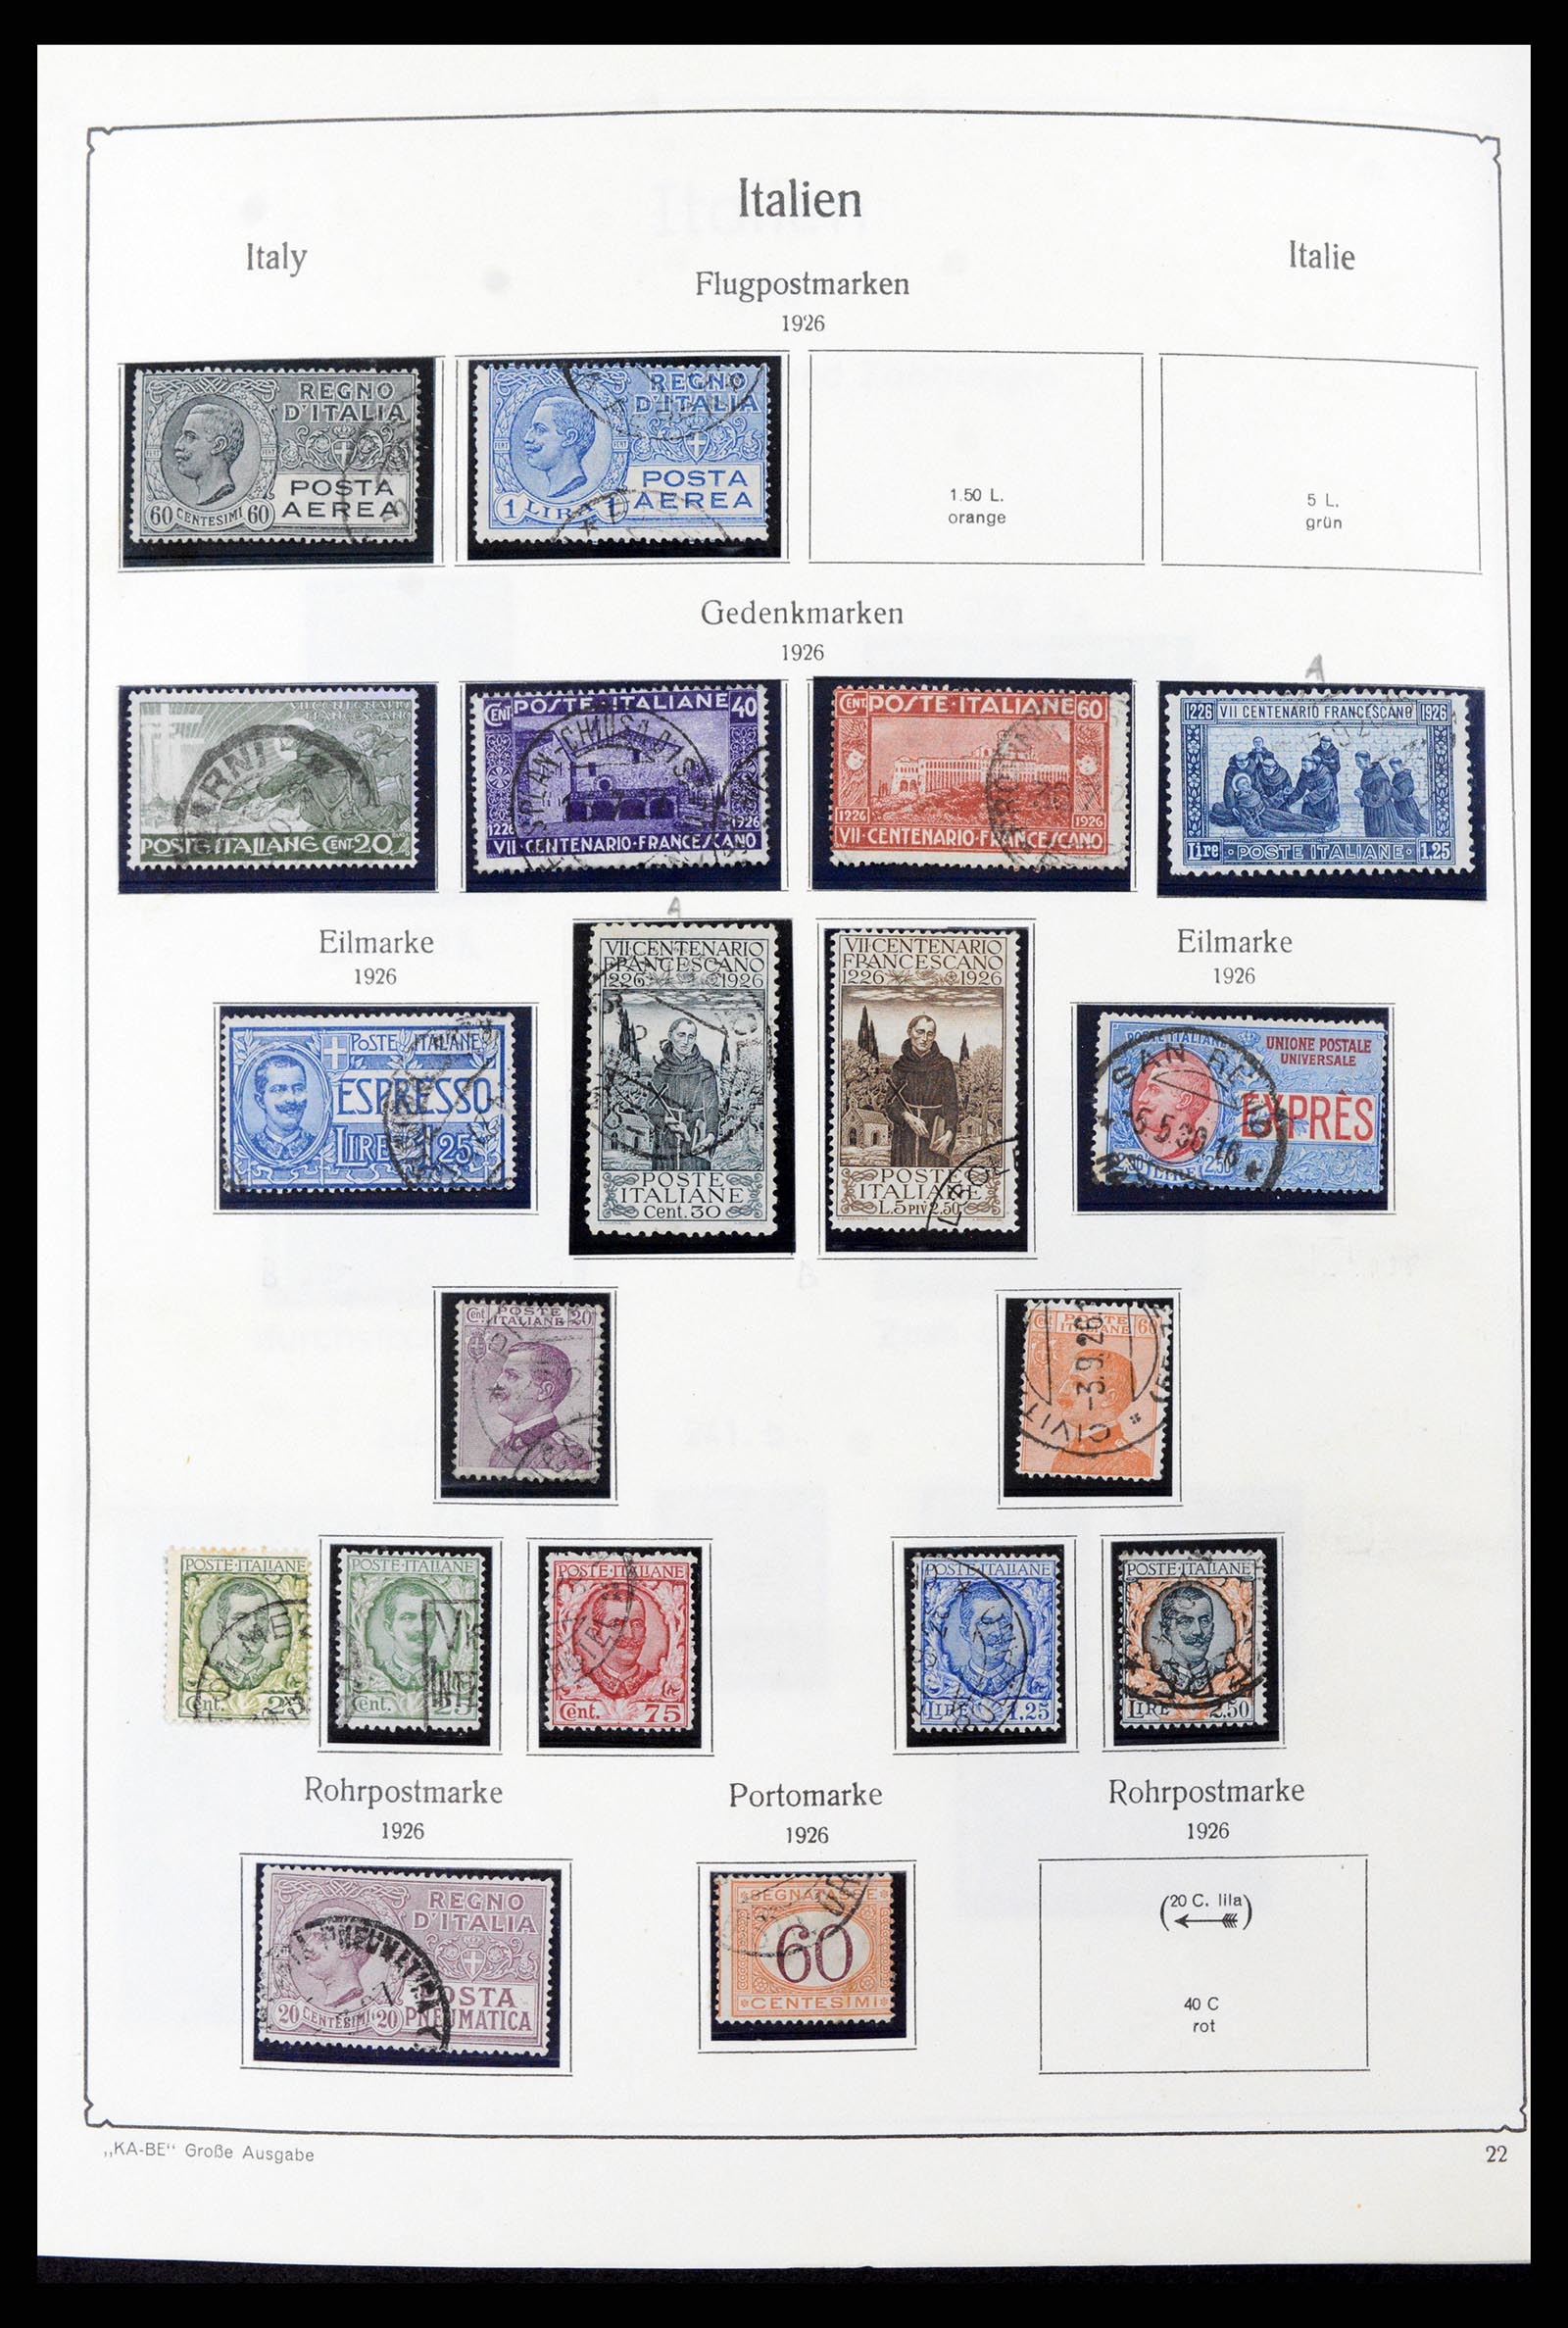 37605 039 - Stamp collection 37605 Italy and States 1855-1974.